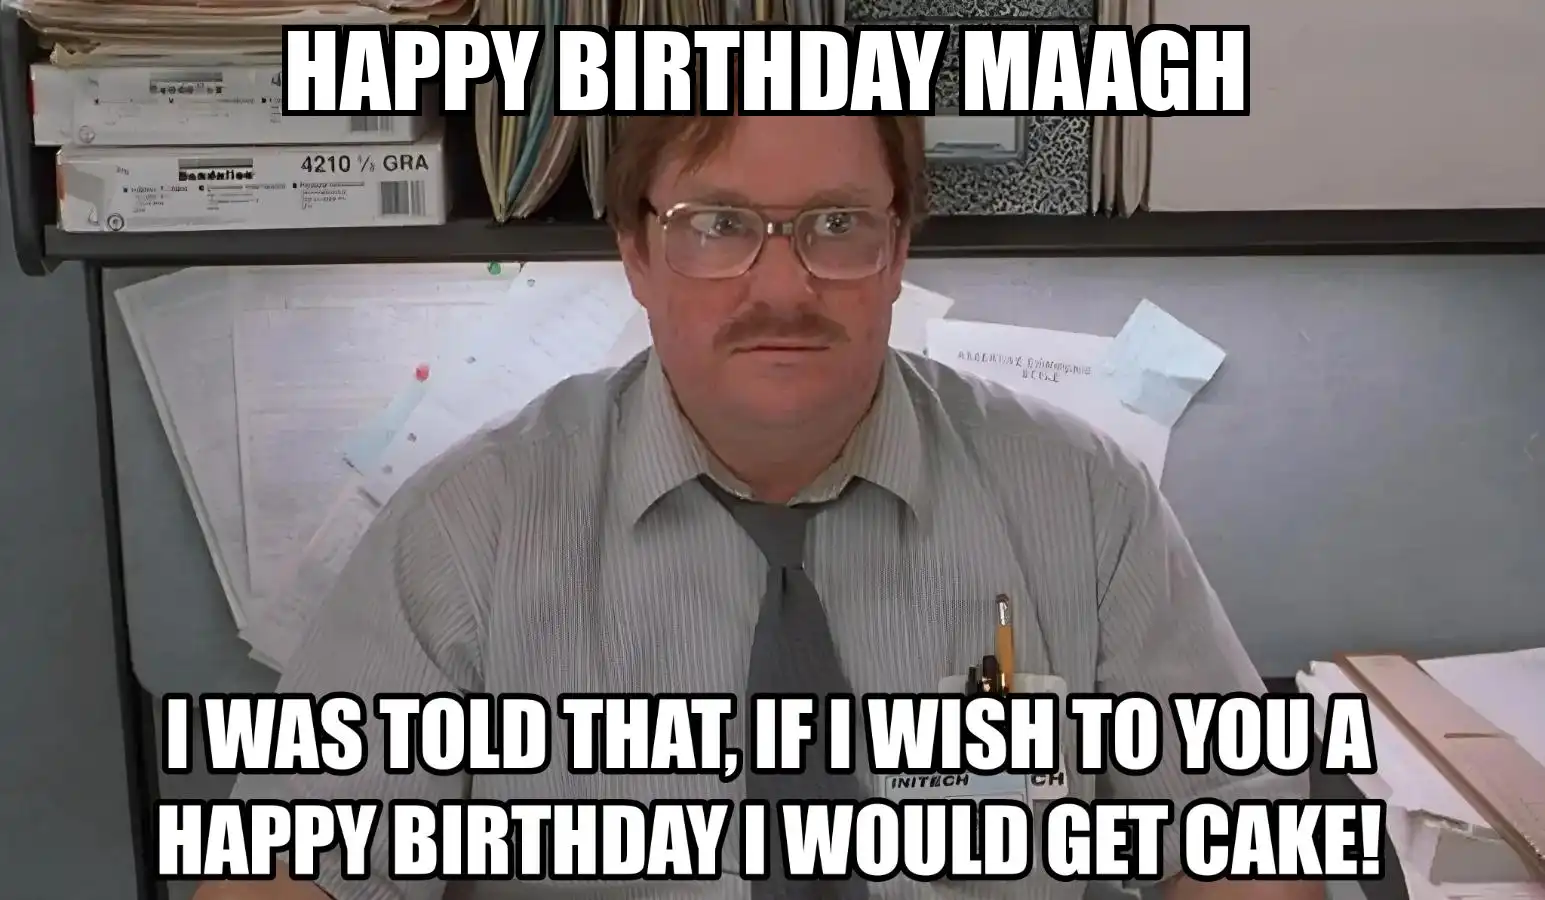 Happy Birthday Maagh I Would Get A Cake Meme